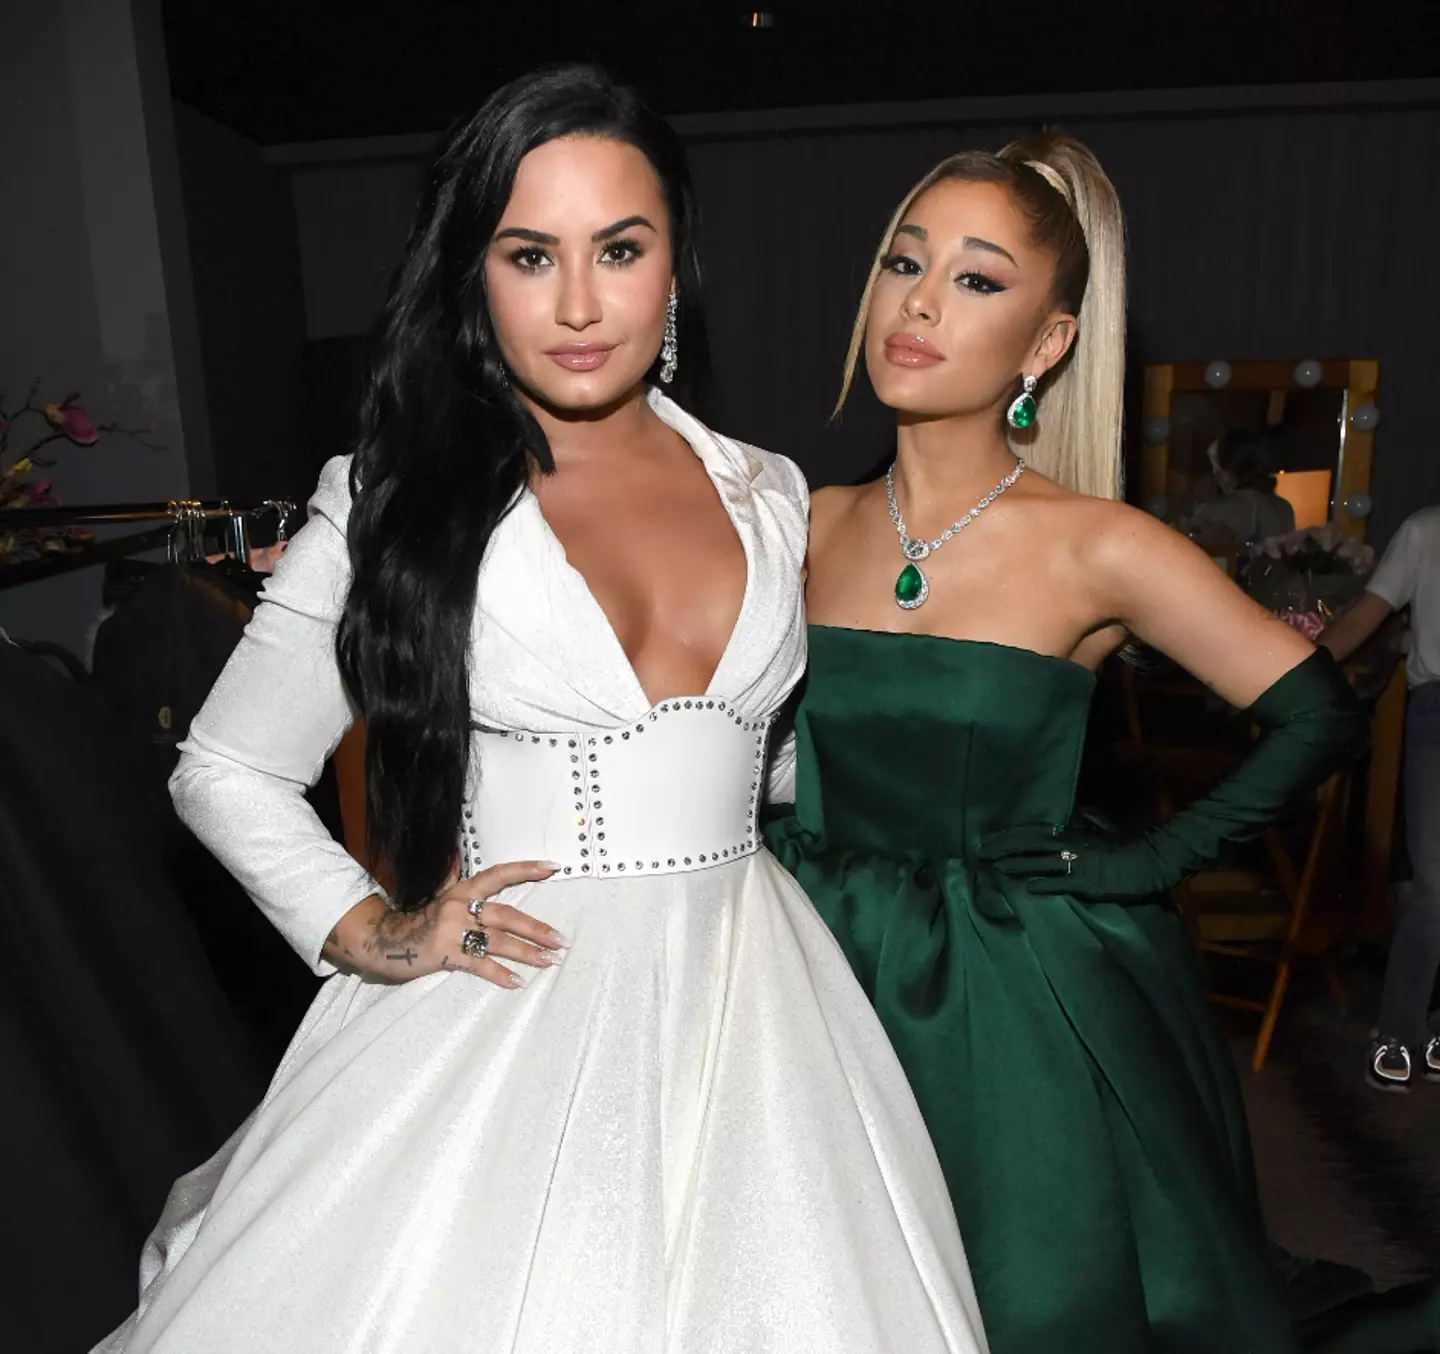 Ariana Grande and Demi Lovato both worked with Scooter Braun.